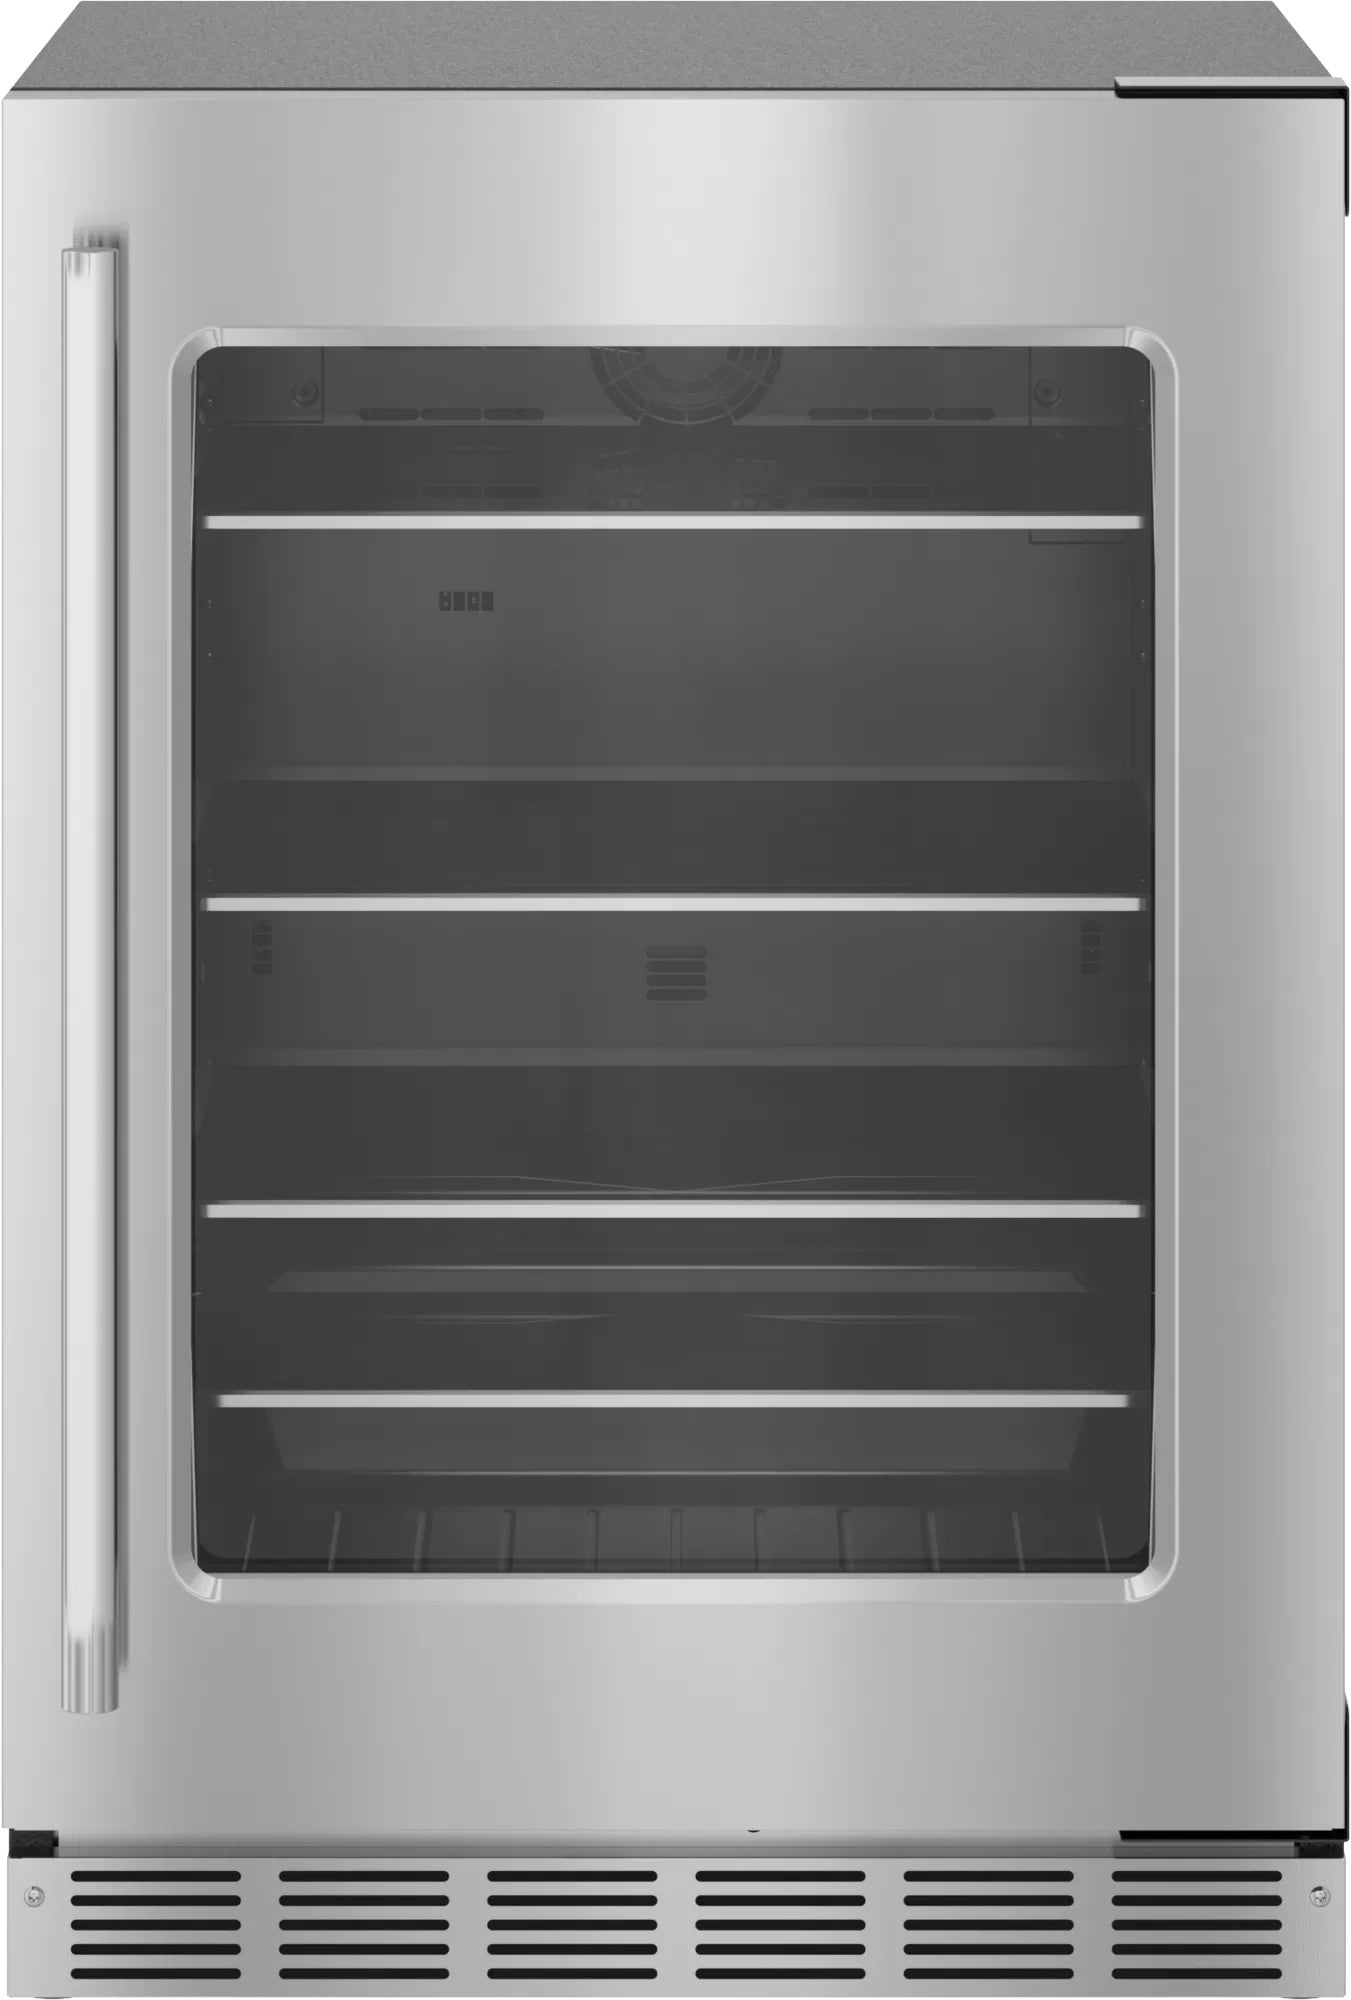 Thermador - 23.9 Inch 5.2 cu. ft Built In / Integrated Refrigerator in Stainless - T24UR915RS